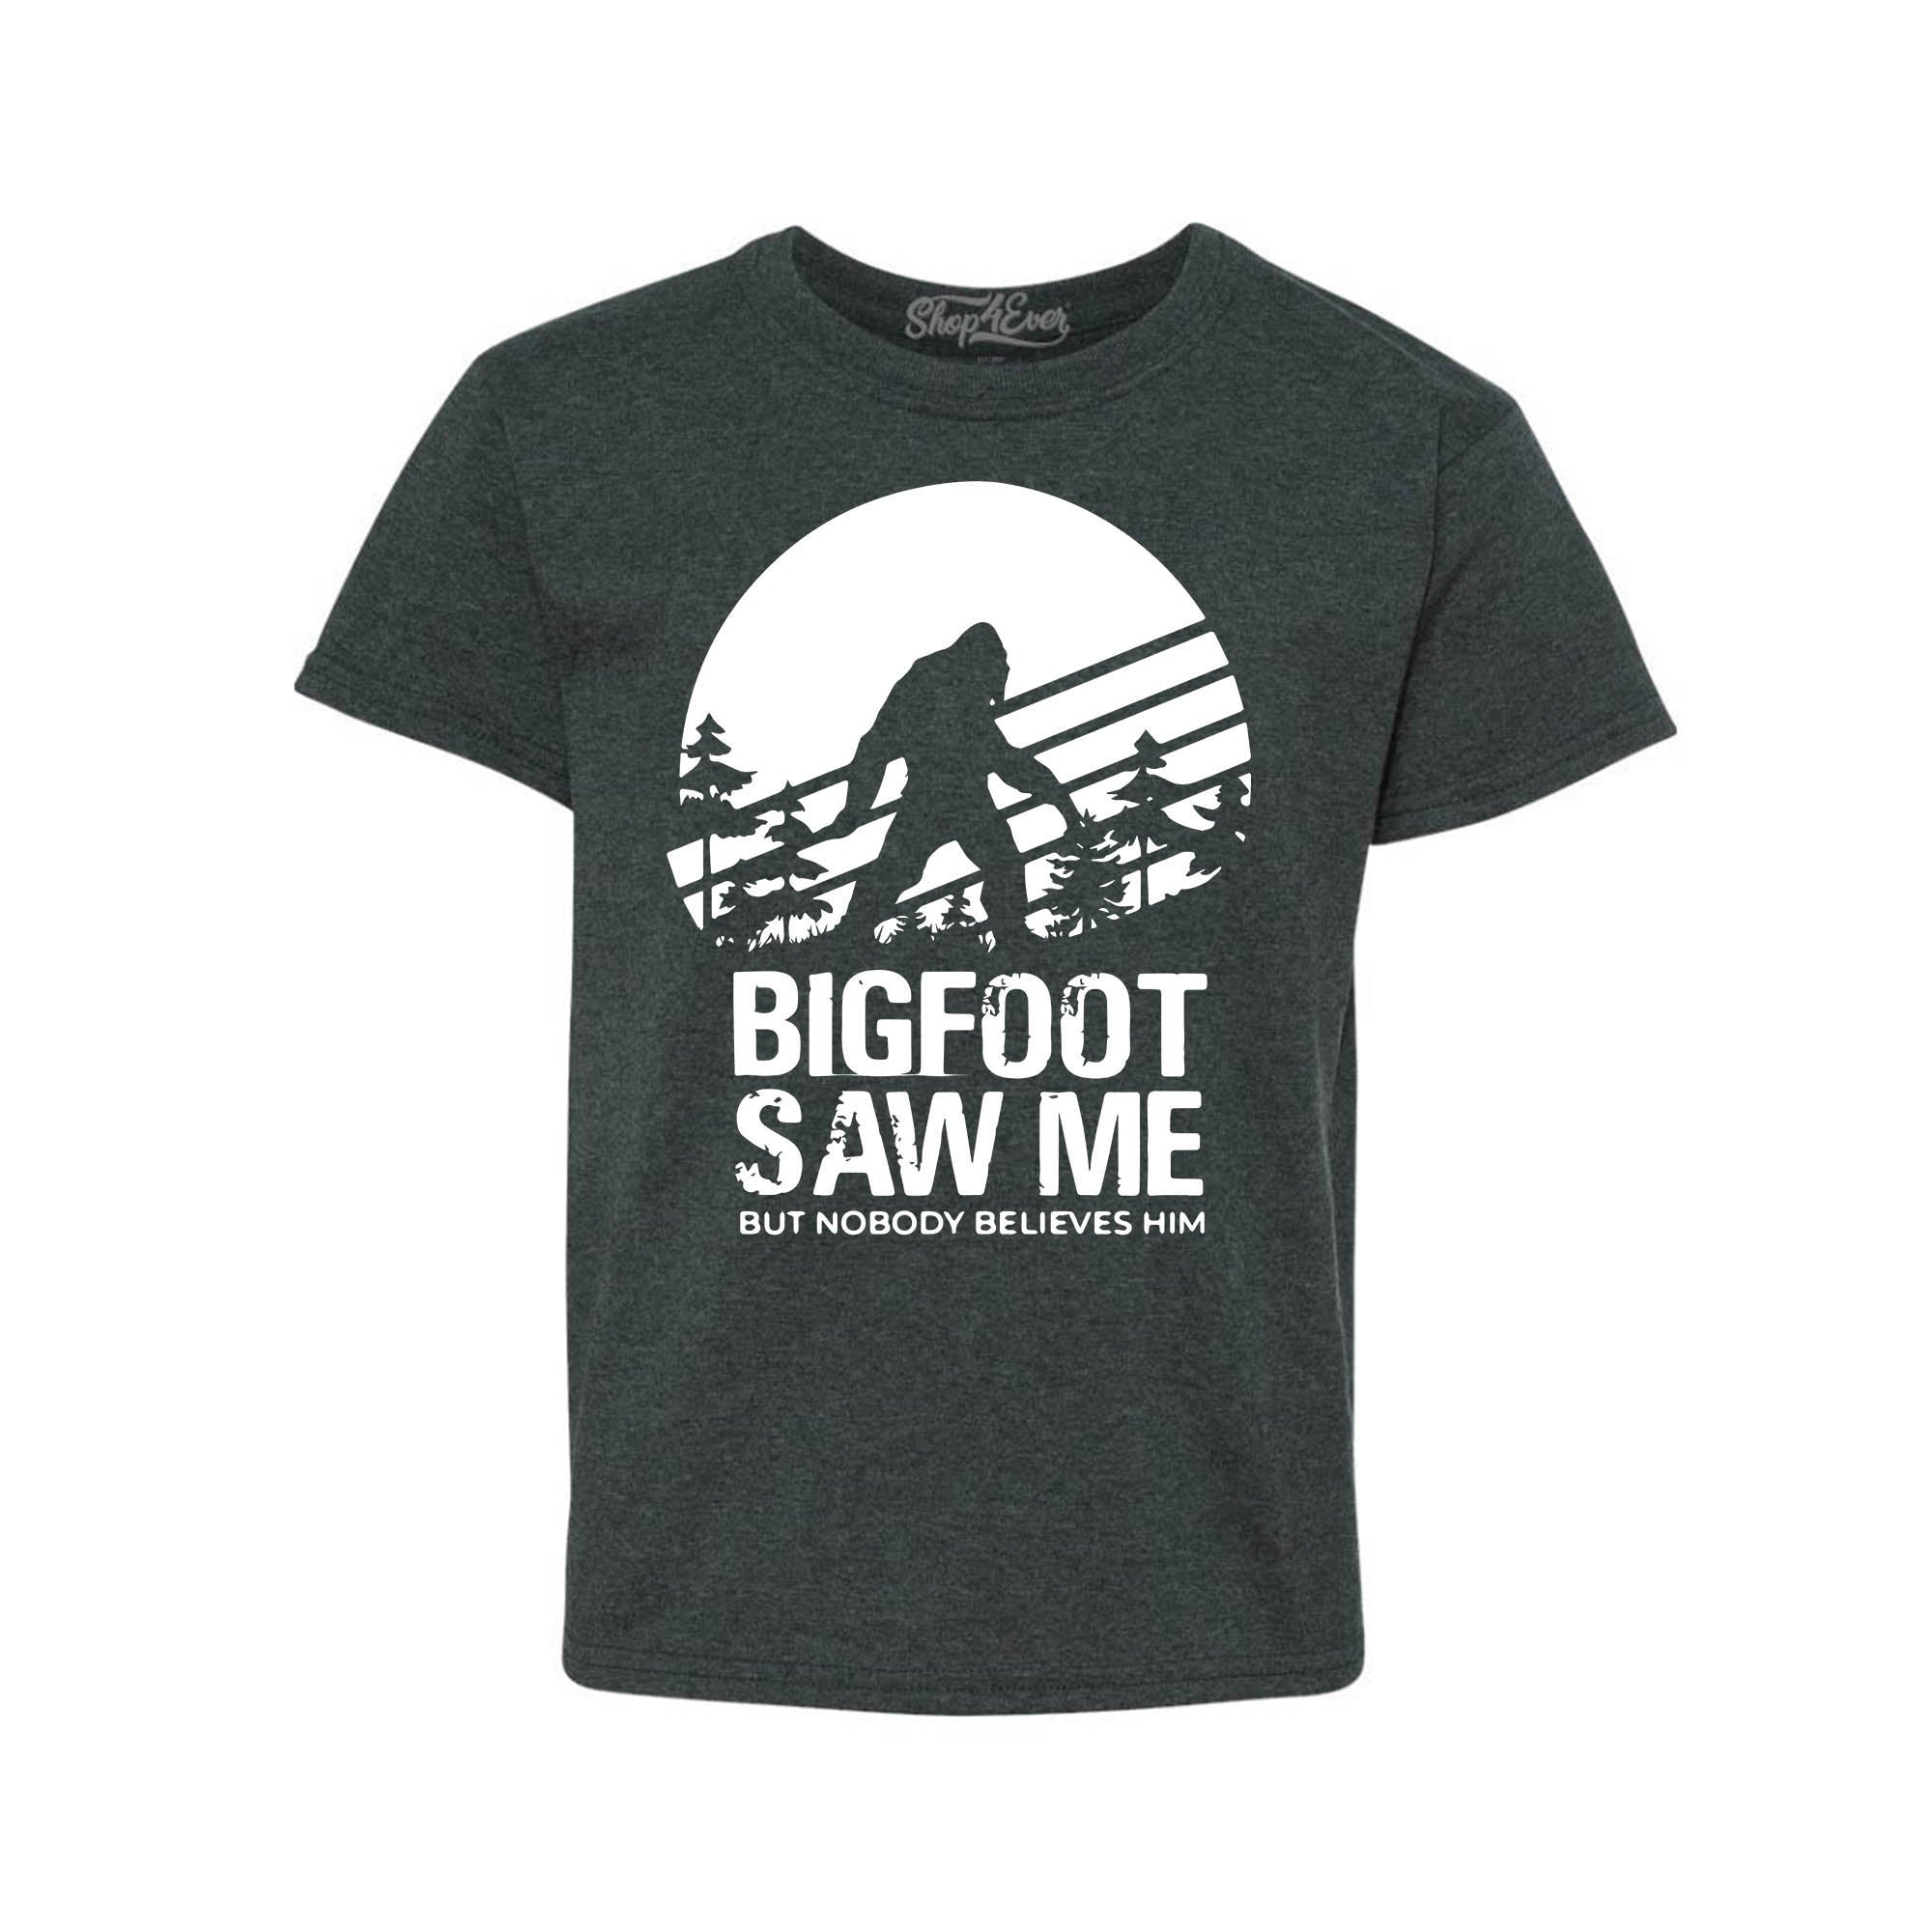 Bigfoot Saw Me But Nobody Believes Him Kids Child Tee Youth's T-Shirt